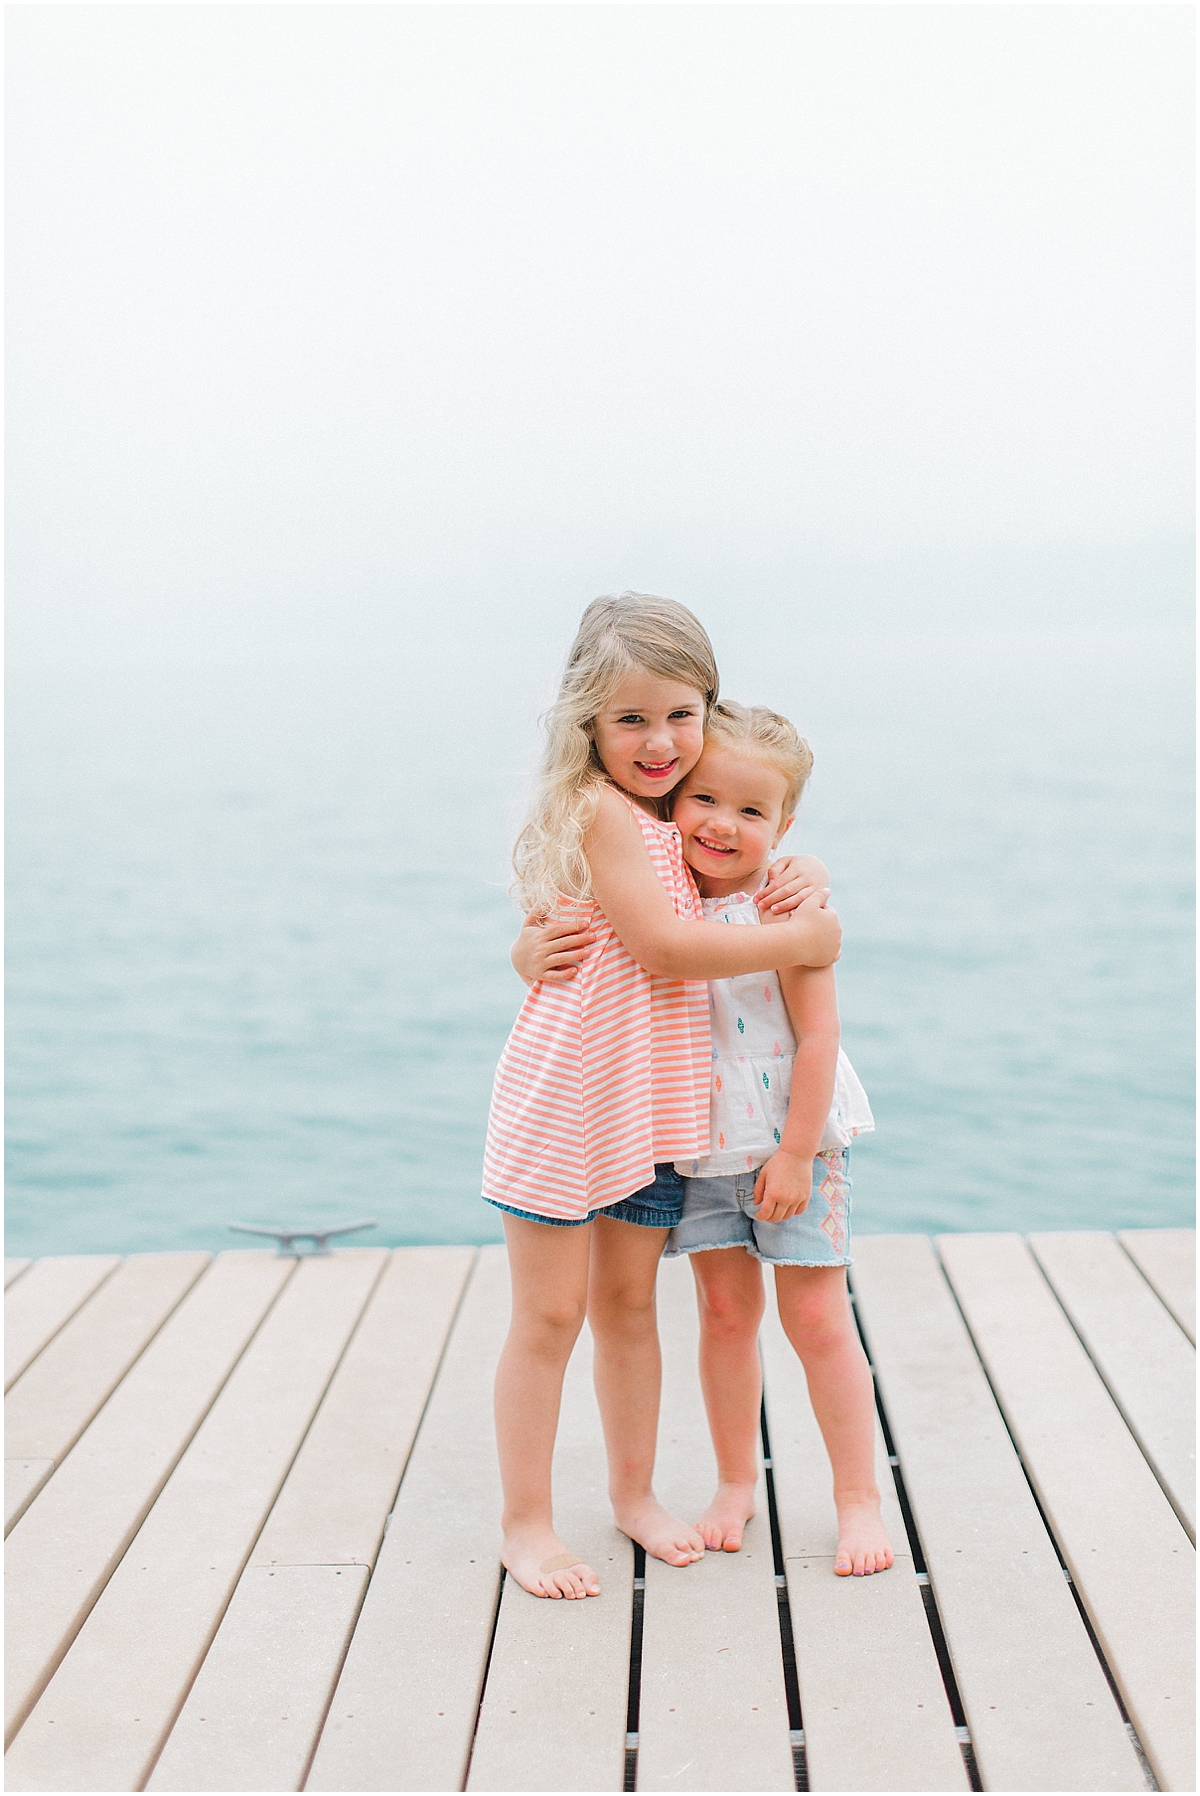 Emma Rose Company | PNW Family Portrait Photographer | Light and Airy Photography Style | What to Wear to Family Pictures | Kindred Presets | Lake Chelan Wedding Portrait Photographer_0113.jpg